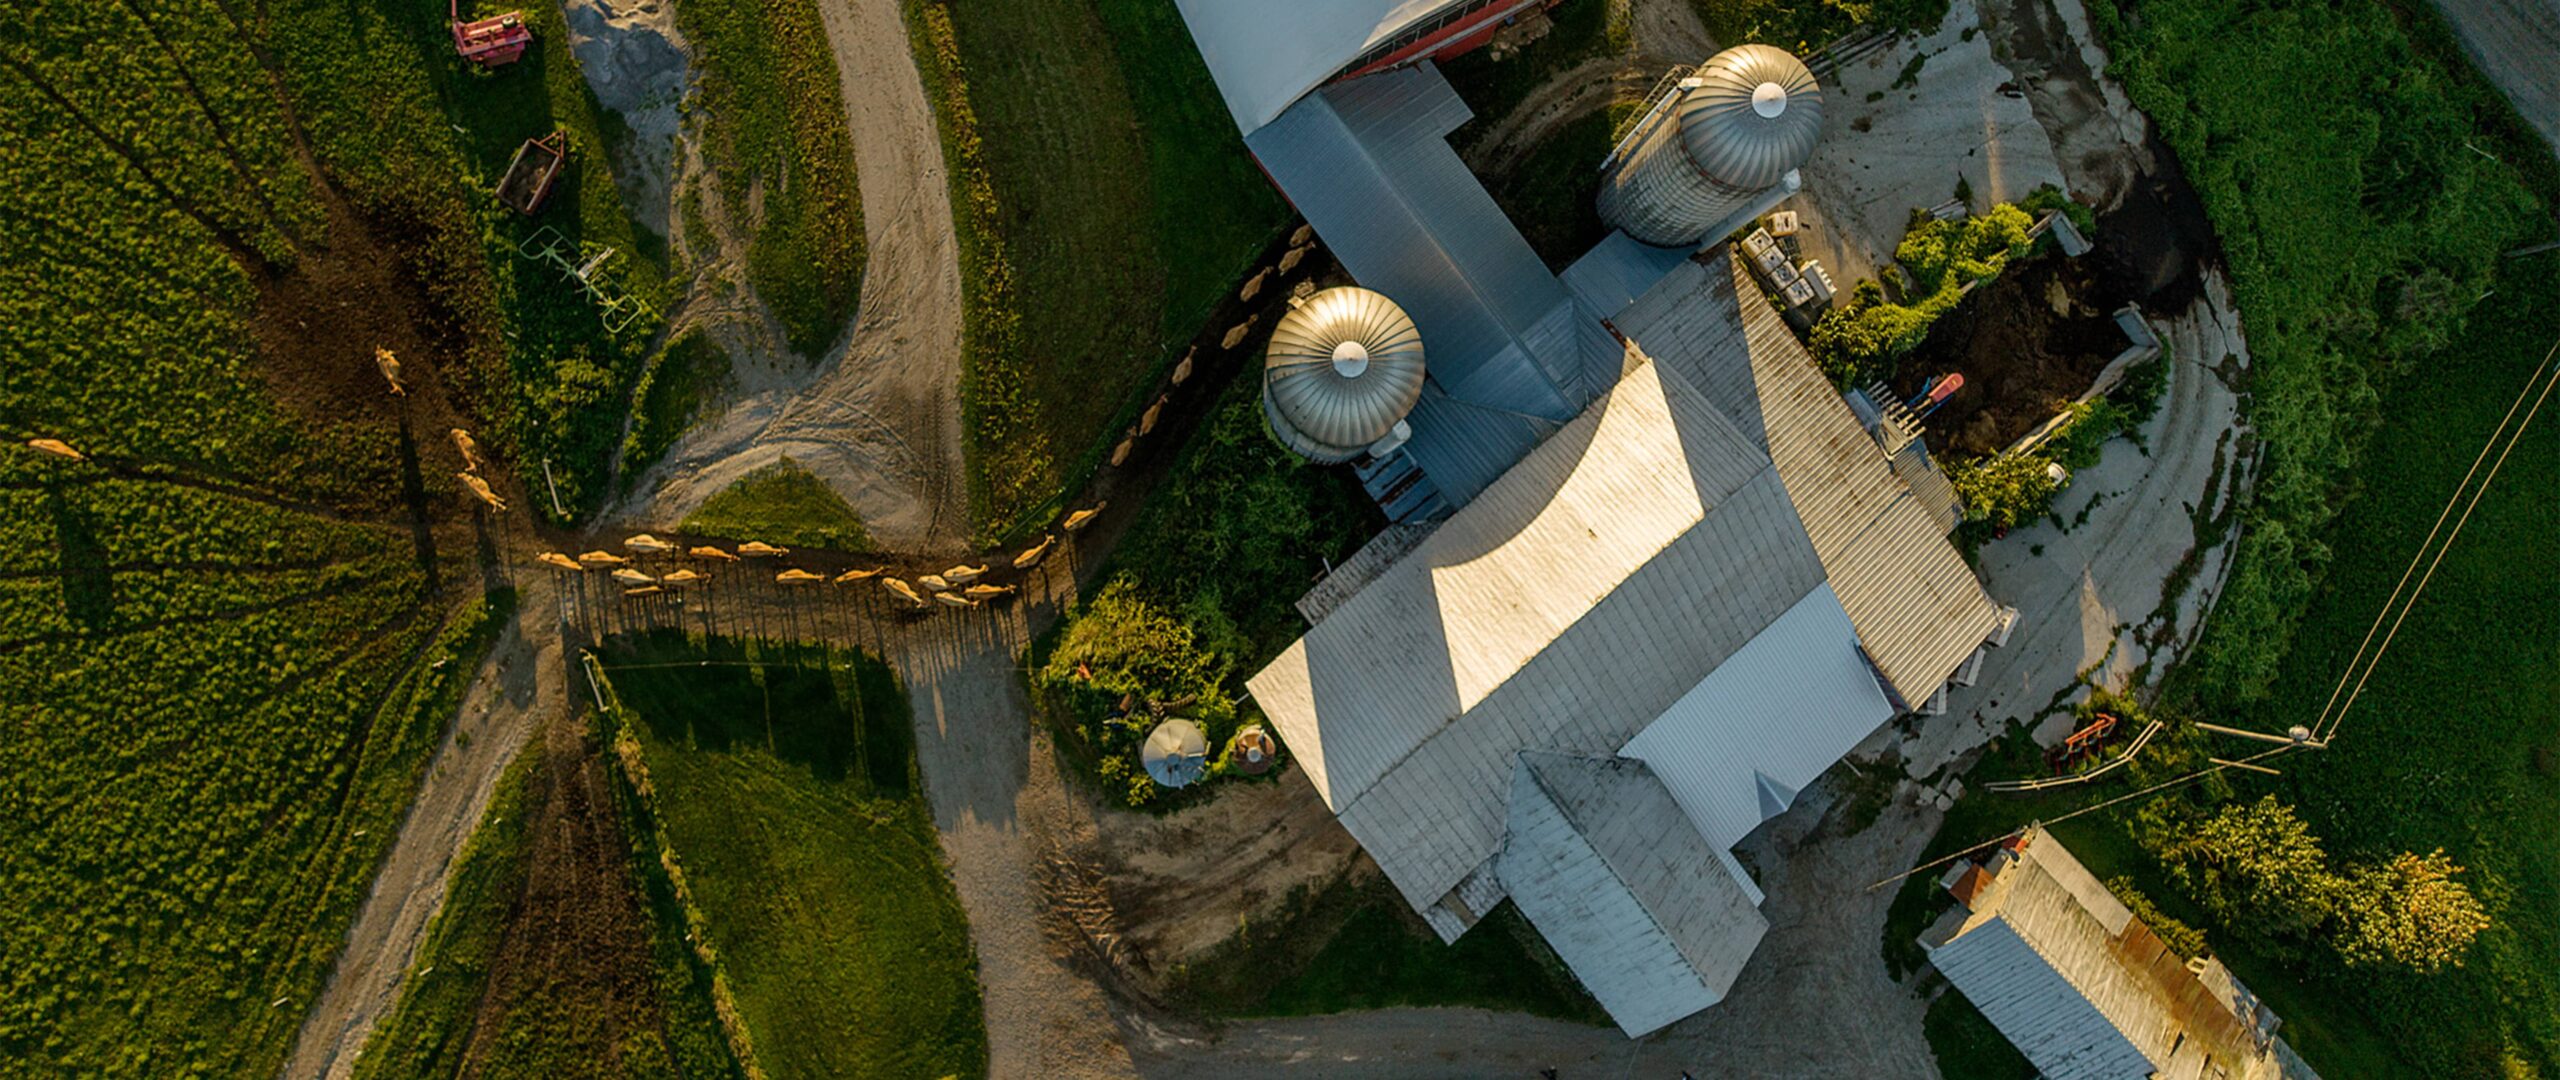 Aerial view of a dairy farm that supplies Stonyfield Organic milk